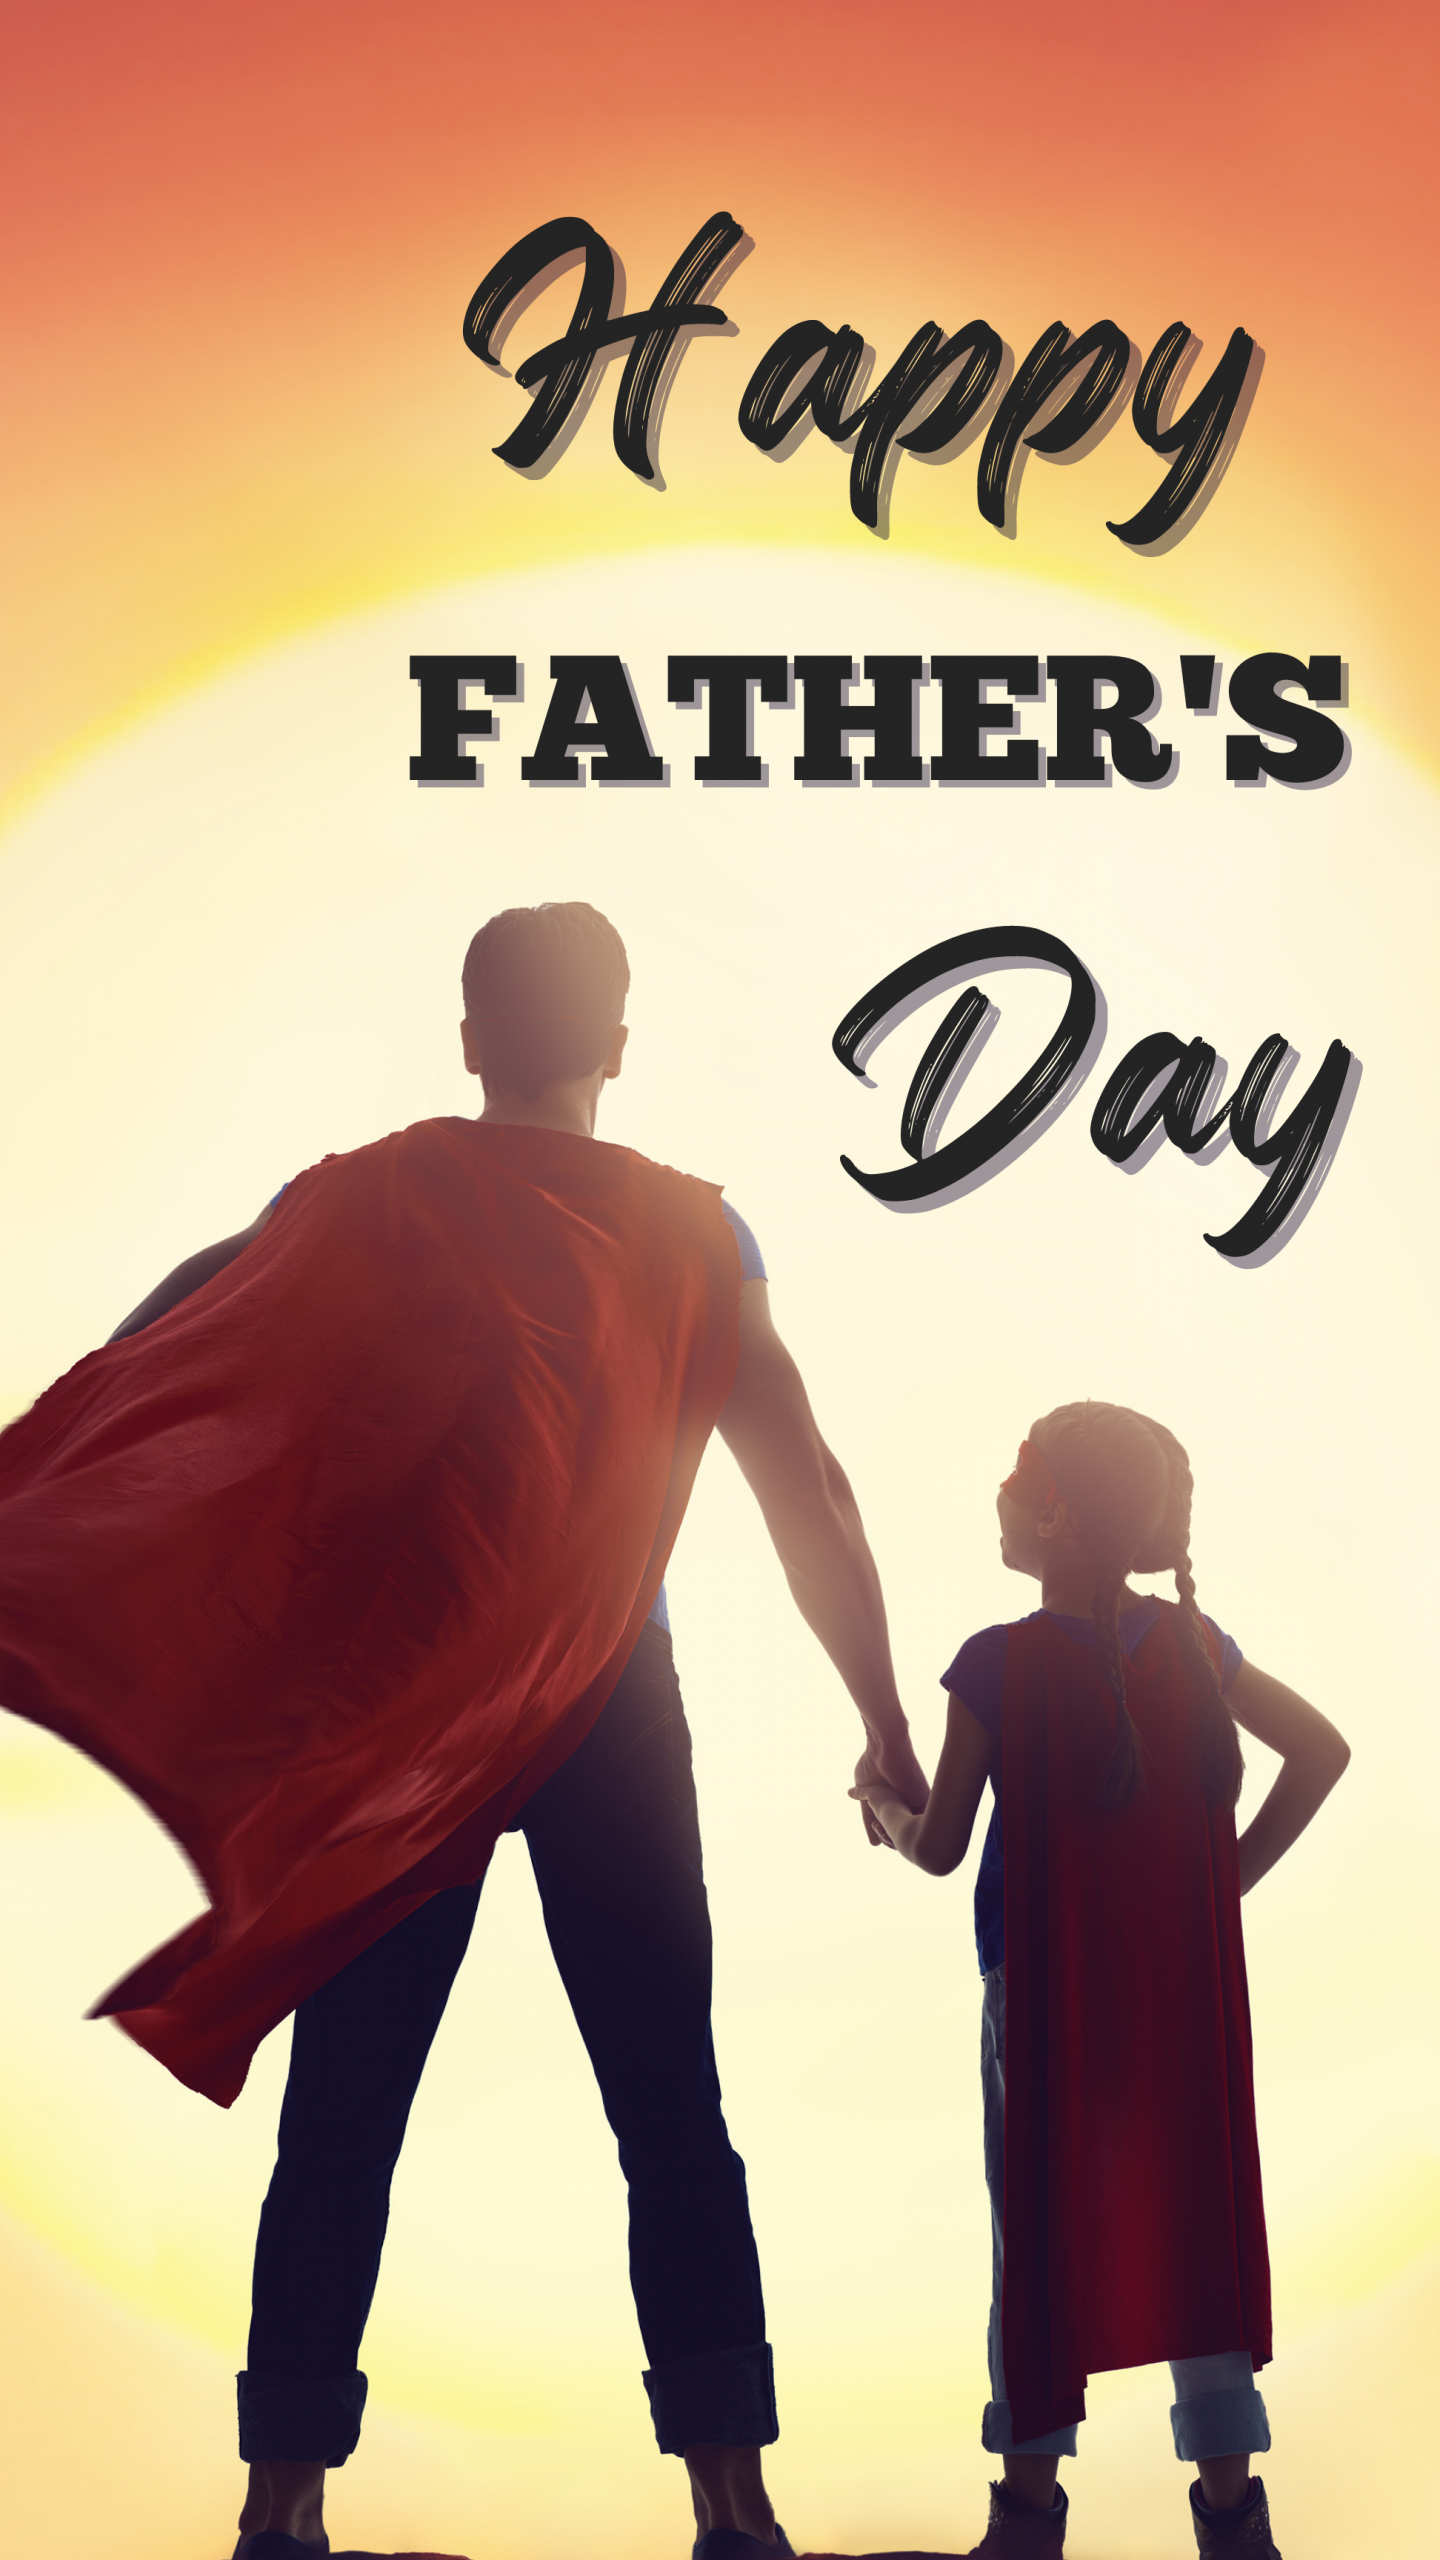 Happy Fathers Day Wallpaper Free Vector And Graphic 51361498